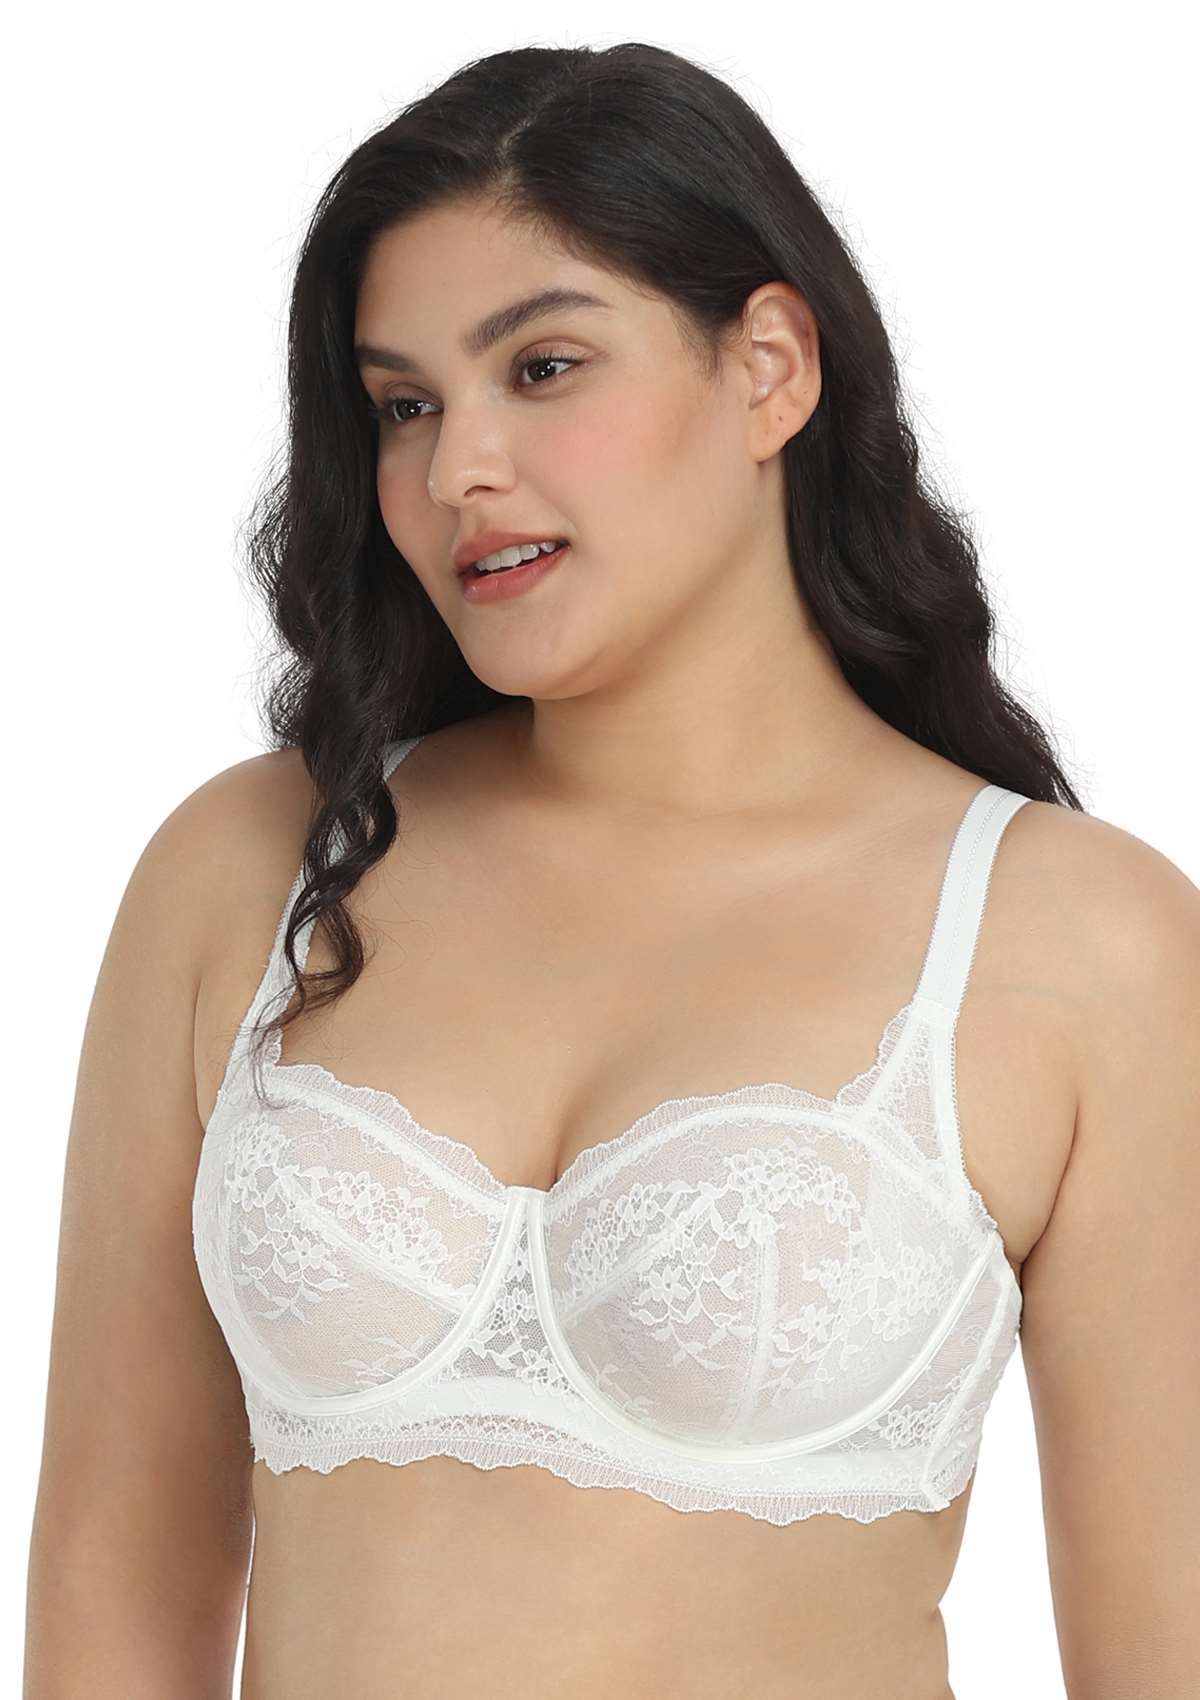 HSIA I Do Floral Lace Bridal Balconette Beautiful Bra For Special Day - White / 42 / DDD/F